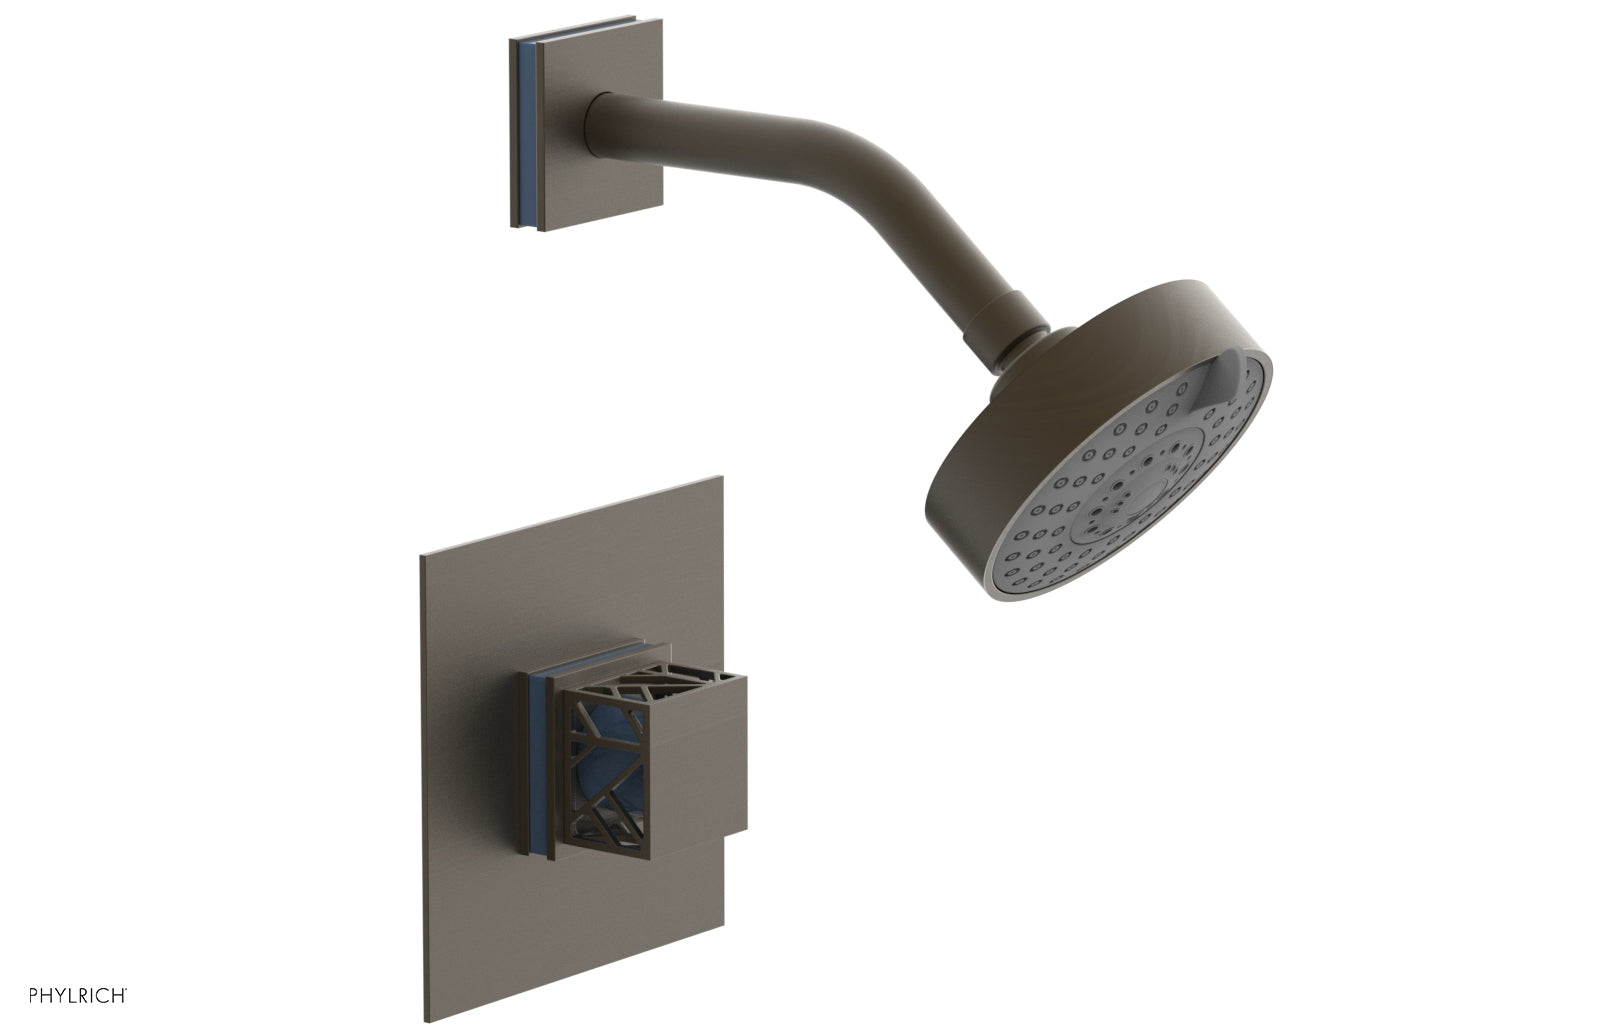 Phylrich JOLIE Pressure Balance Shower Set - Square Handle with "Light Blue" Accents